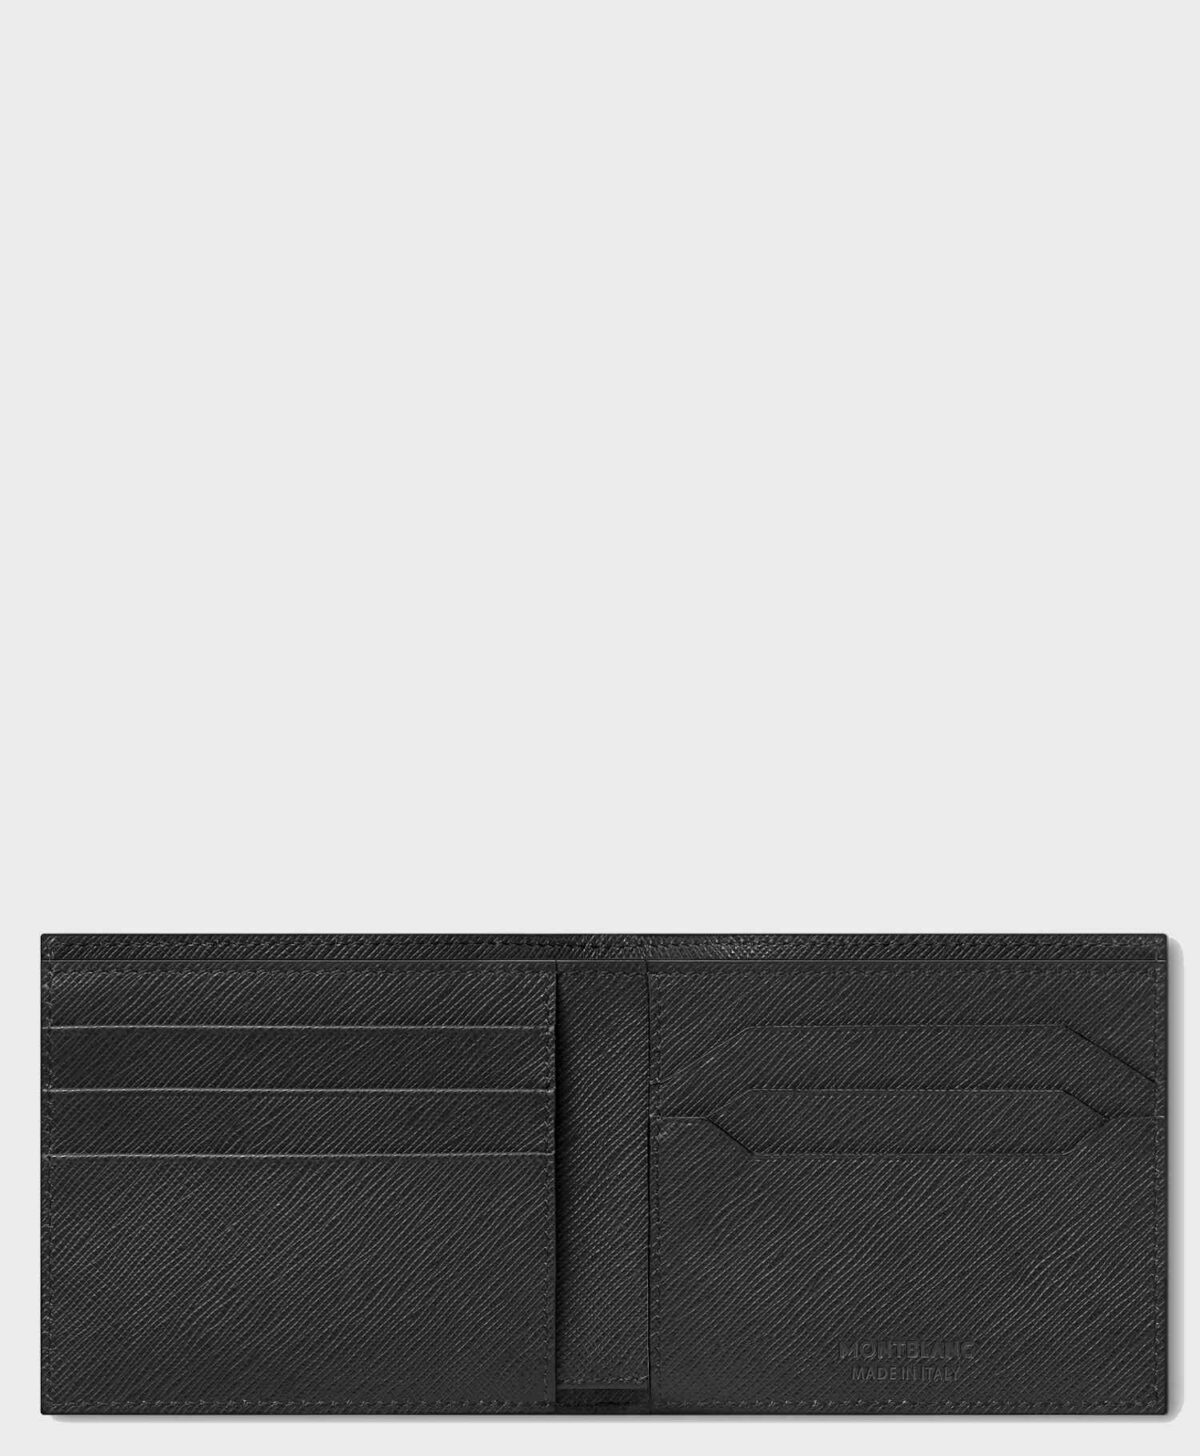 Review Montblanc Sartorial Wallet 6cc MB130315 authentic